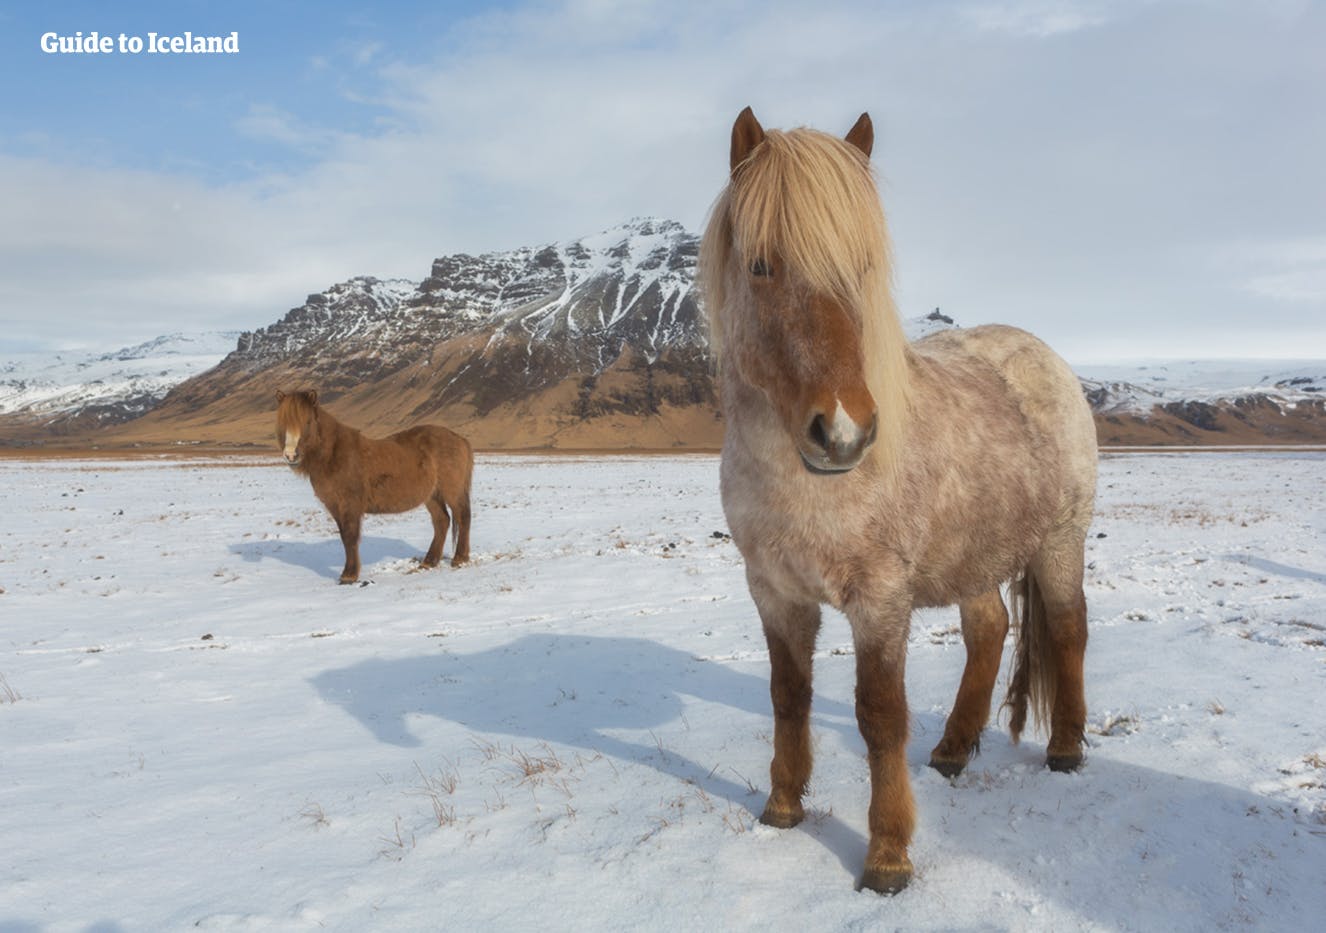 You might spot a few Icelandic horses on your winter self-drive tour.